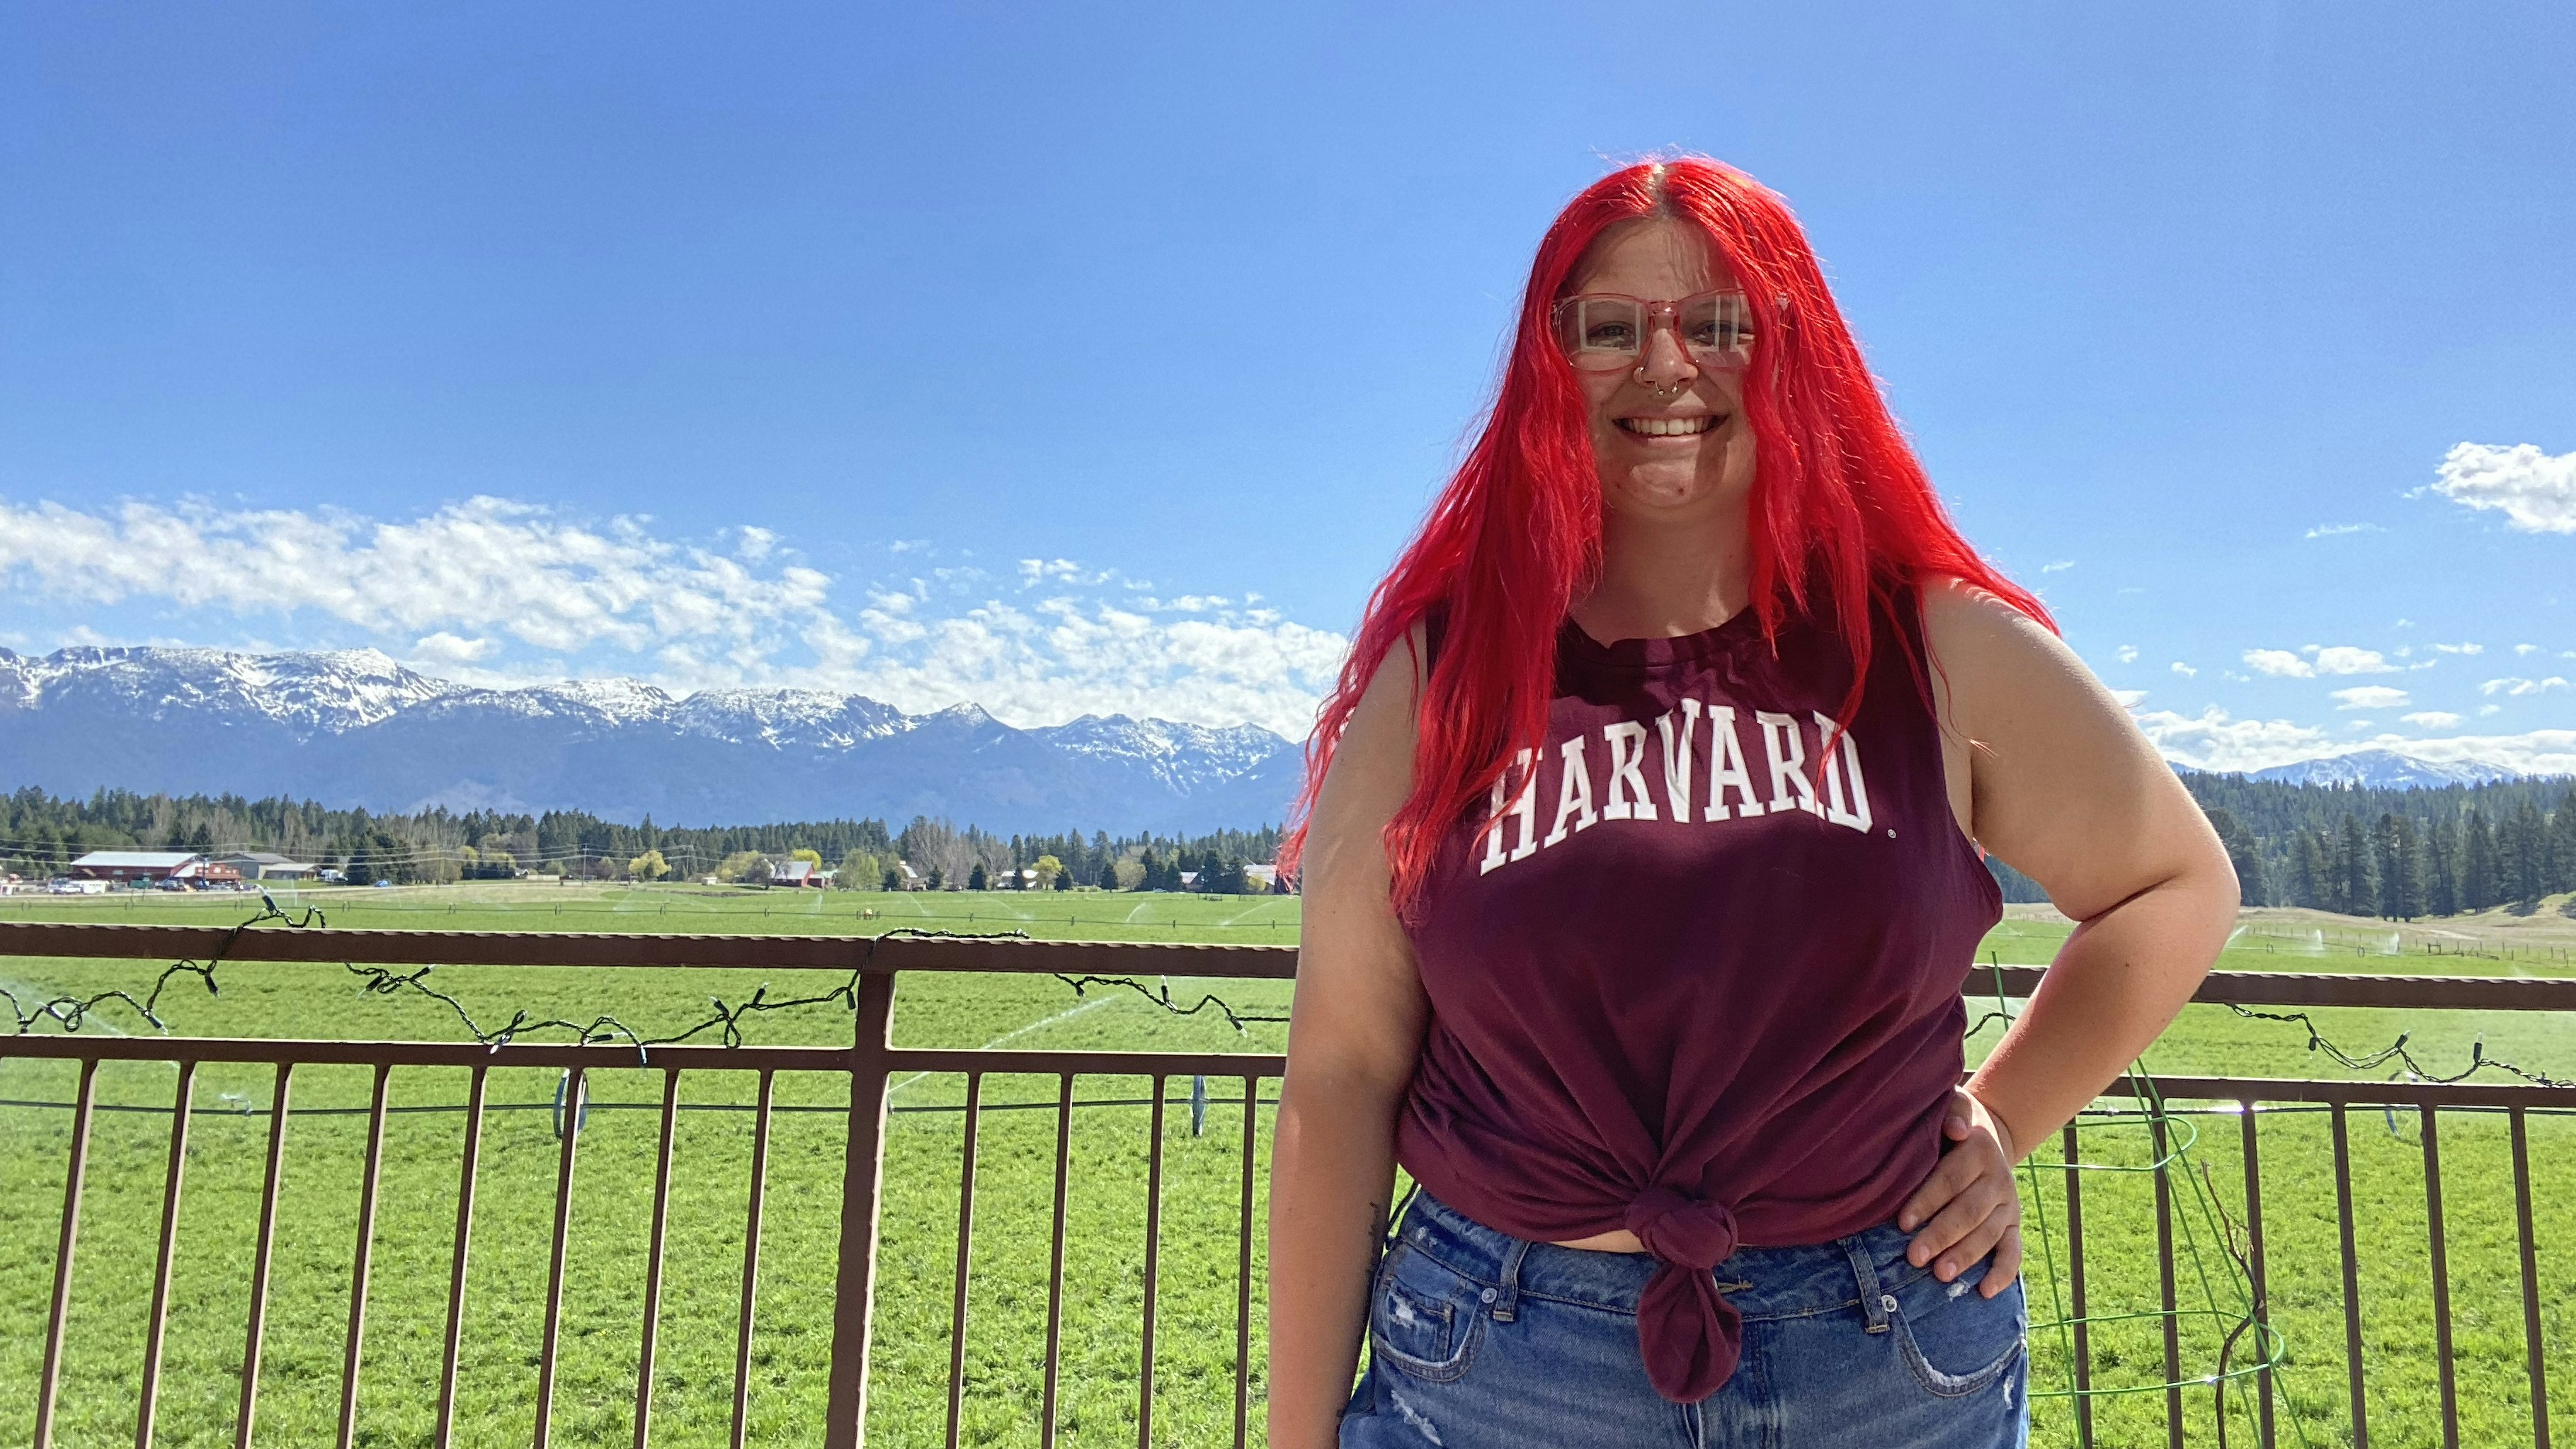 A smiling Liz Hoveland poses outdoors in a Harvard T-shirt. The Rocky Mountains are visible far behind her.